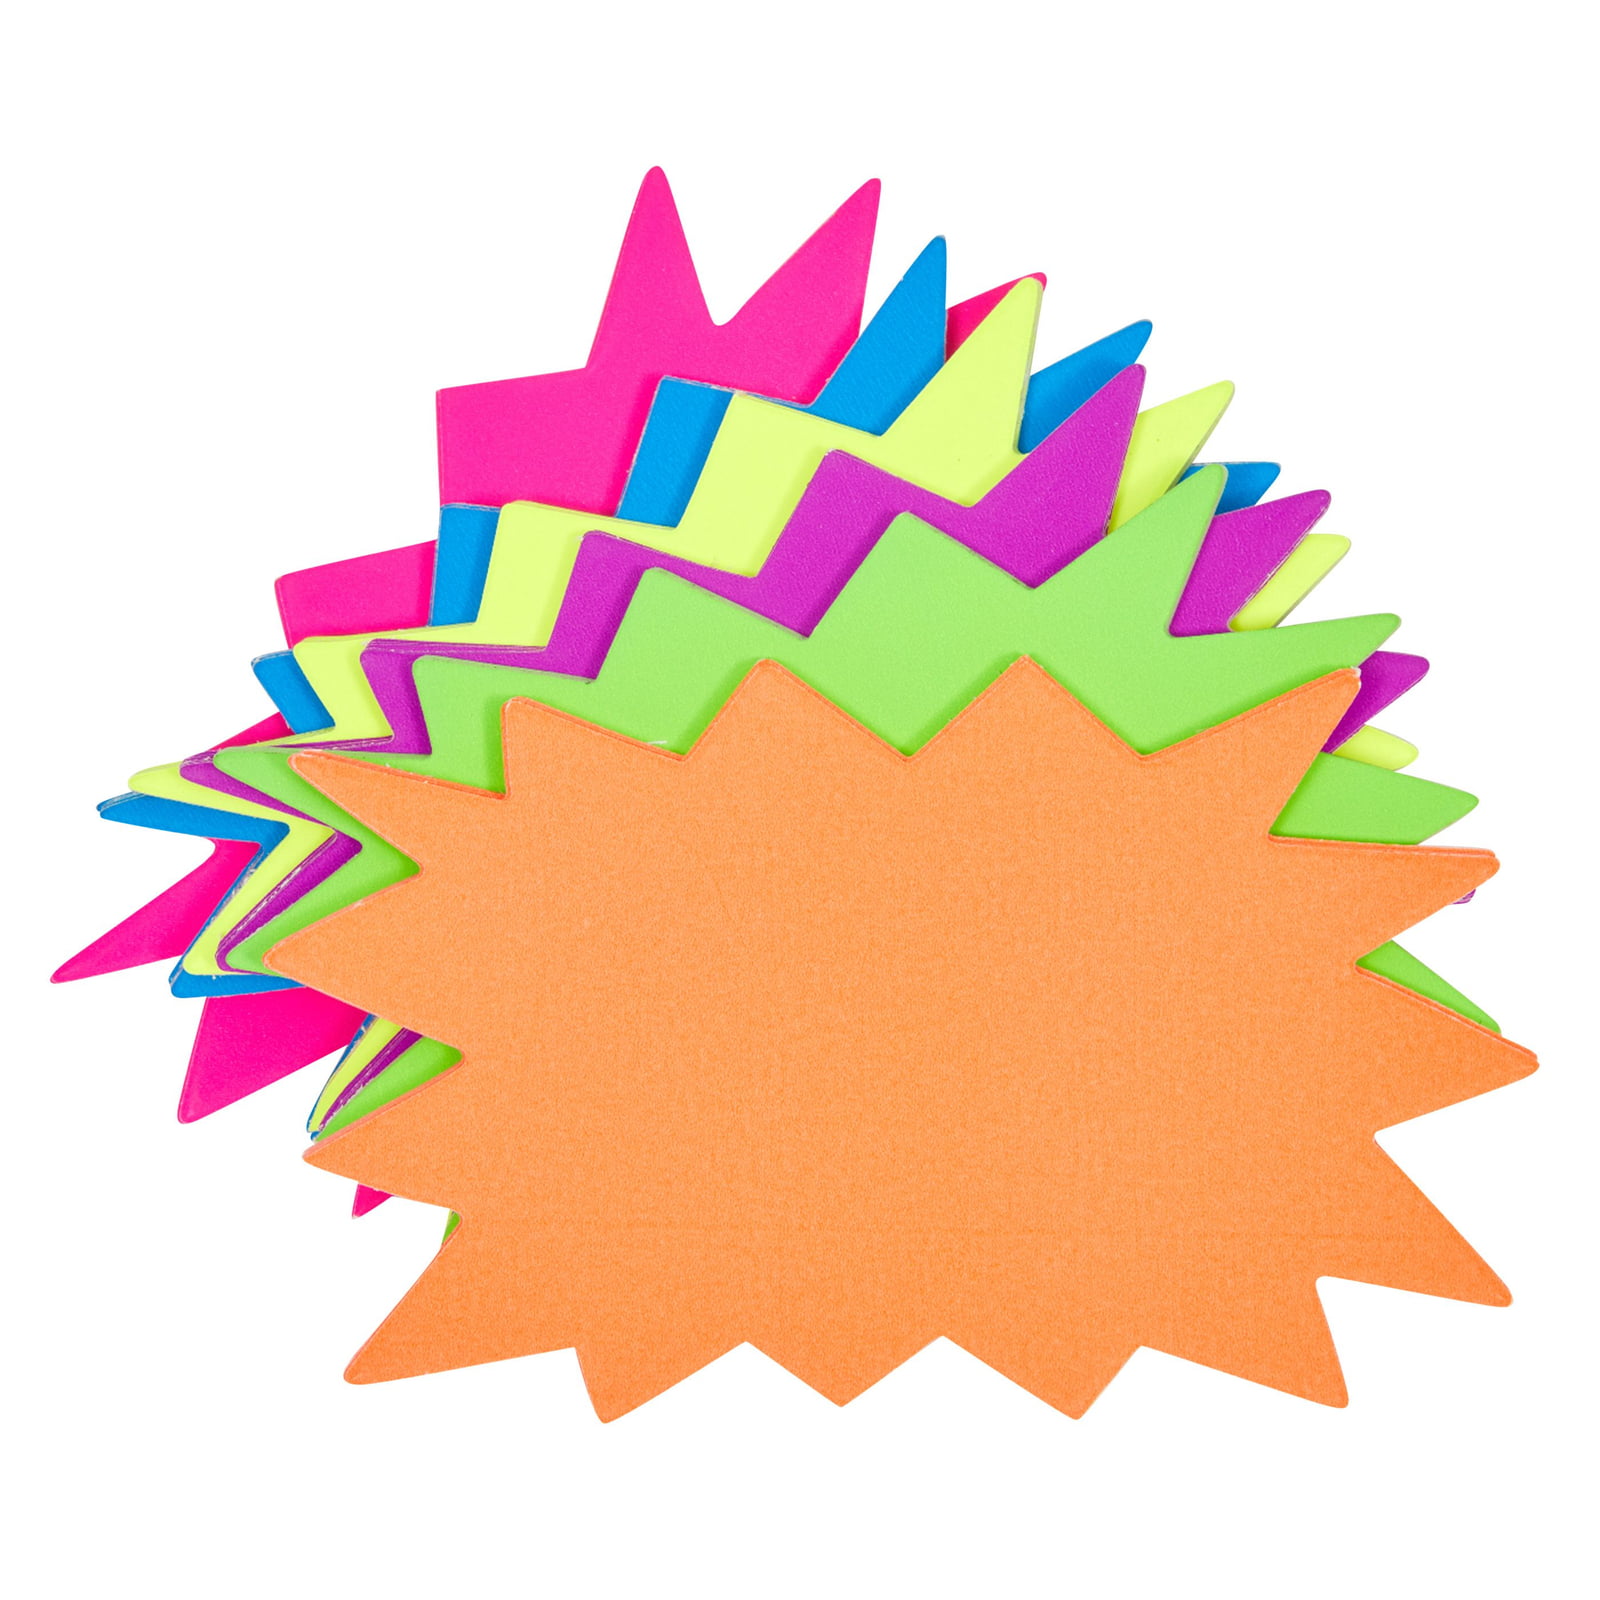 4"x4" Round 50pk Fluorescent Starburst Price Neon Retail Tags Cards Signs NEW 